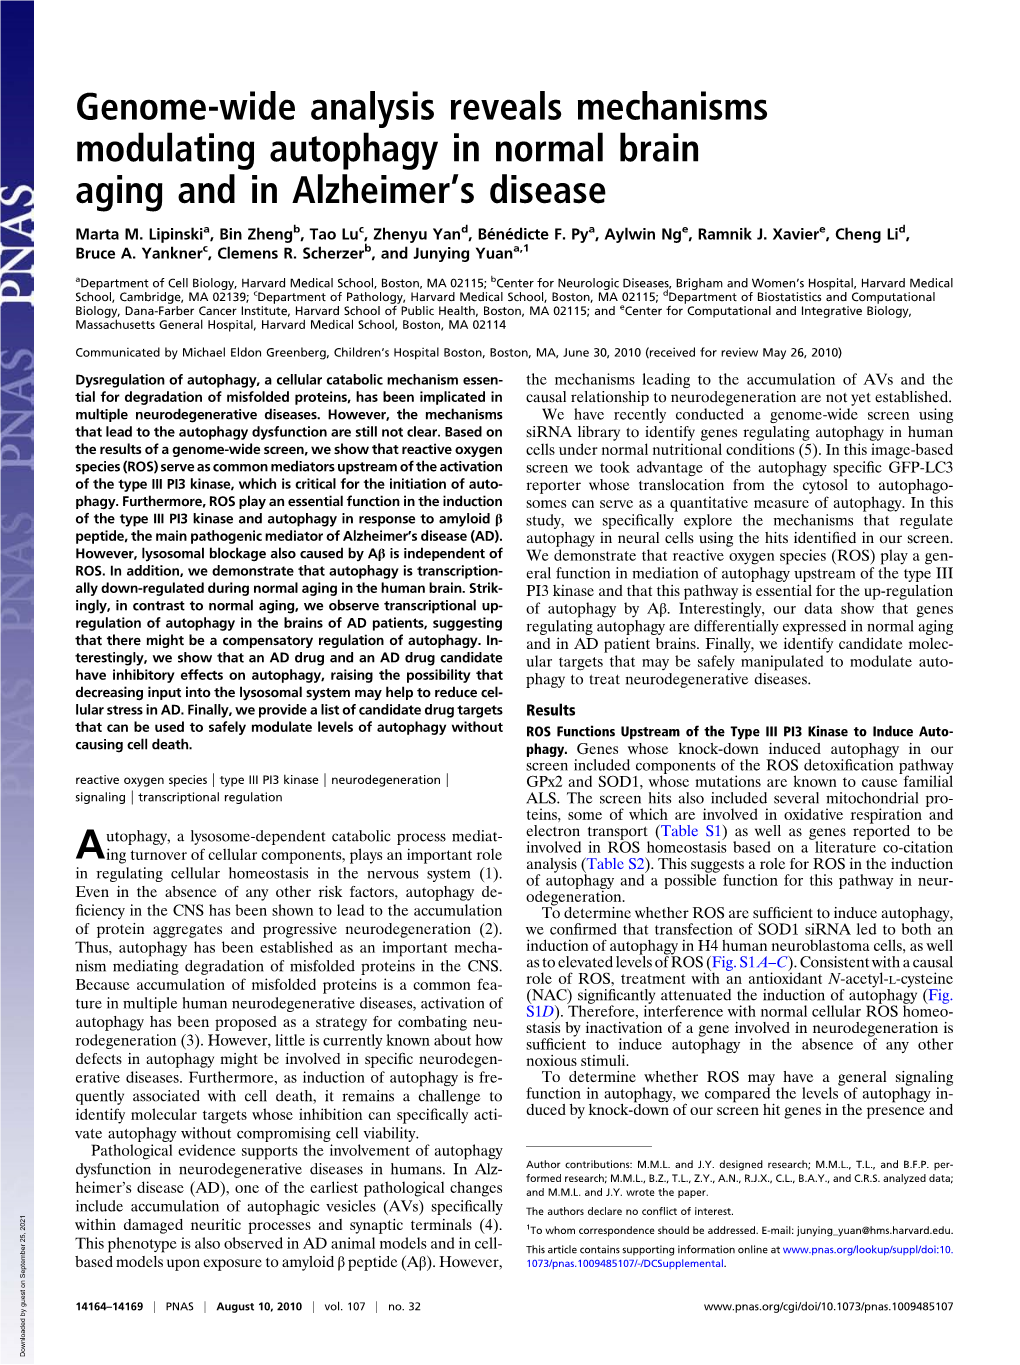 Genome-Wide Analysis Reveals Mechanisms Modulating Autophagy in Normal Brain Aging and in Alzheimer’S Disease